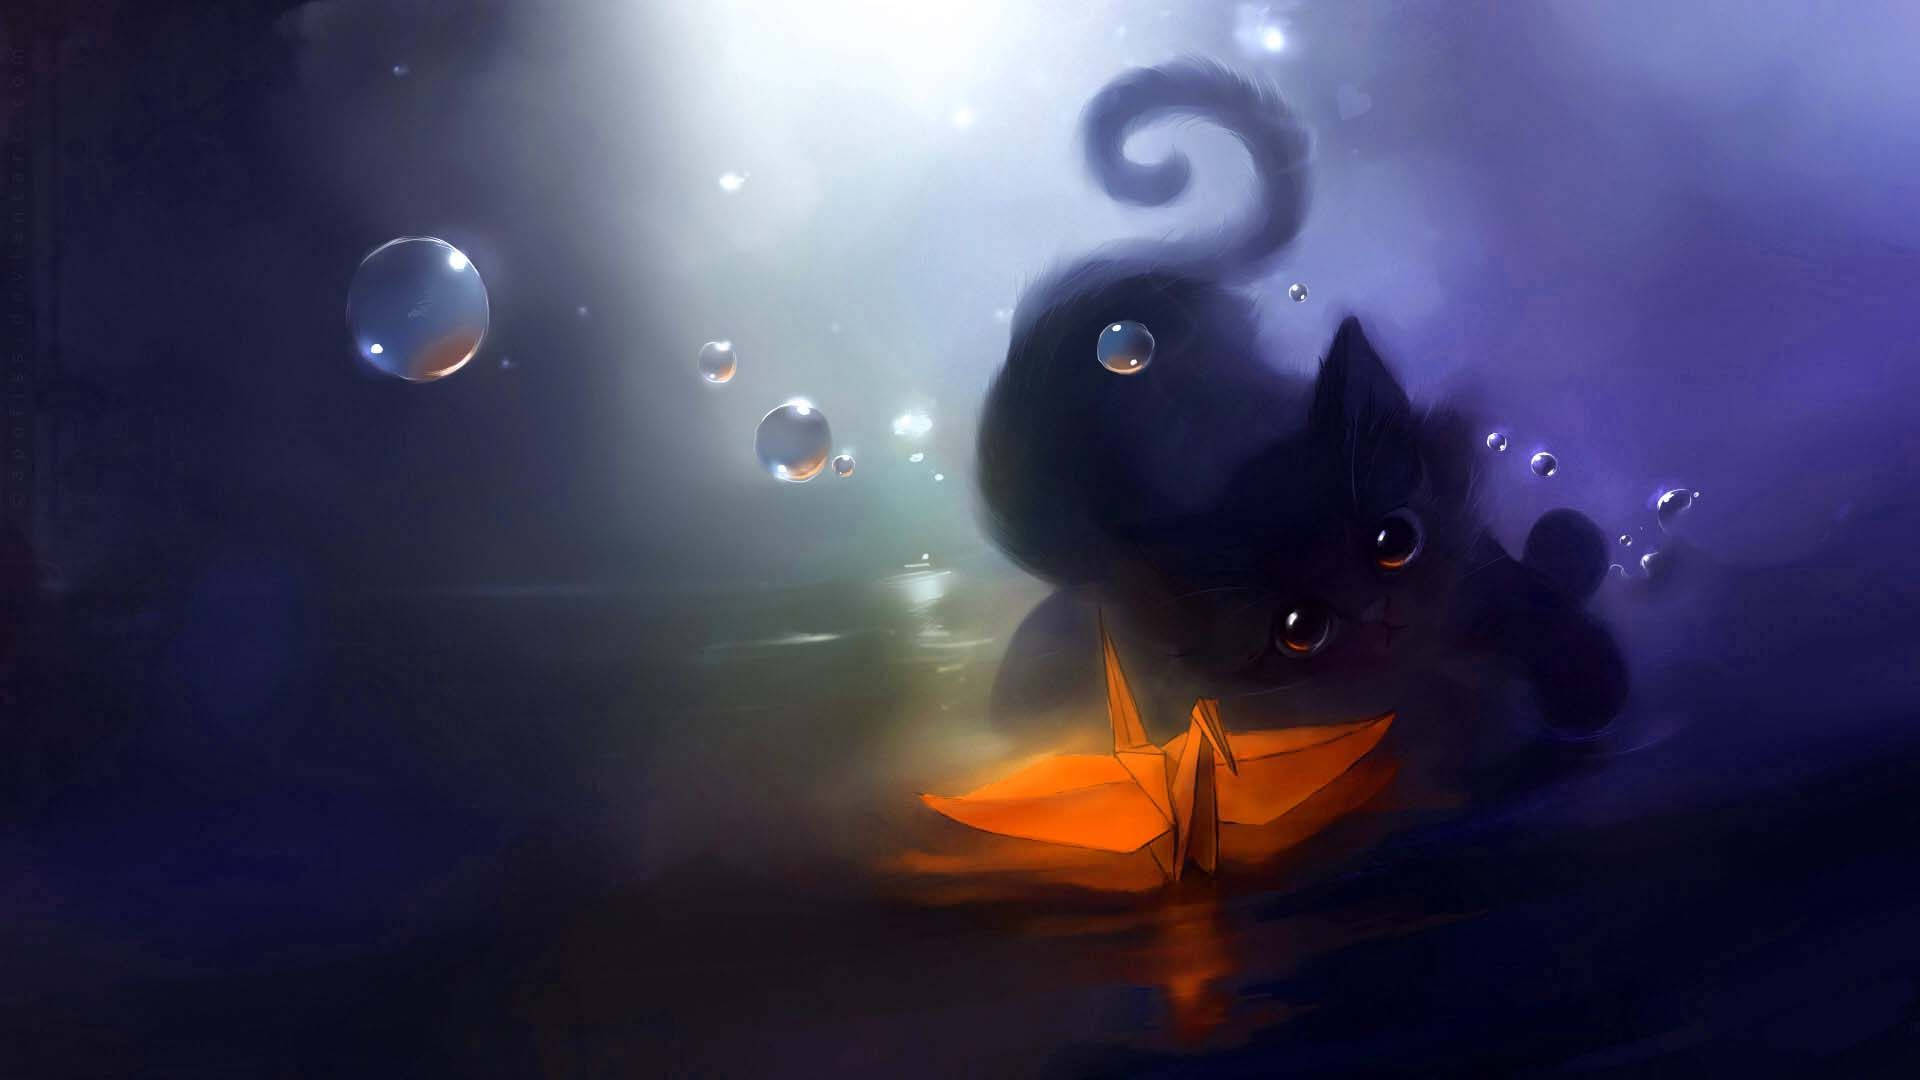 1920X1080 Anime Cat Wallpaper and Background